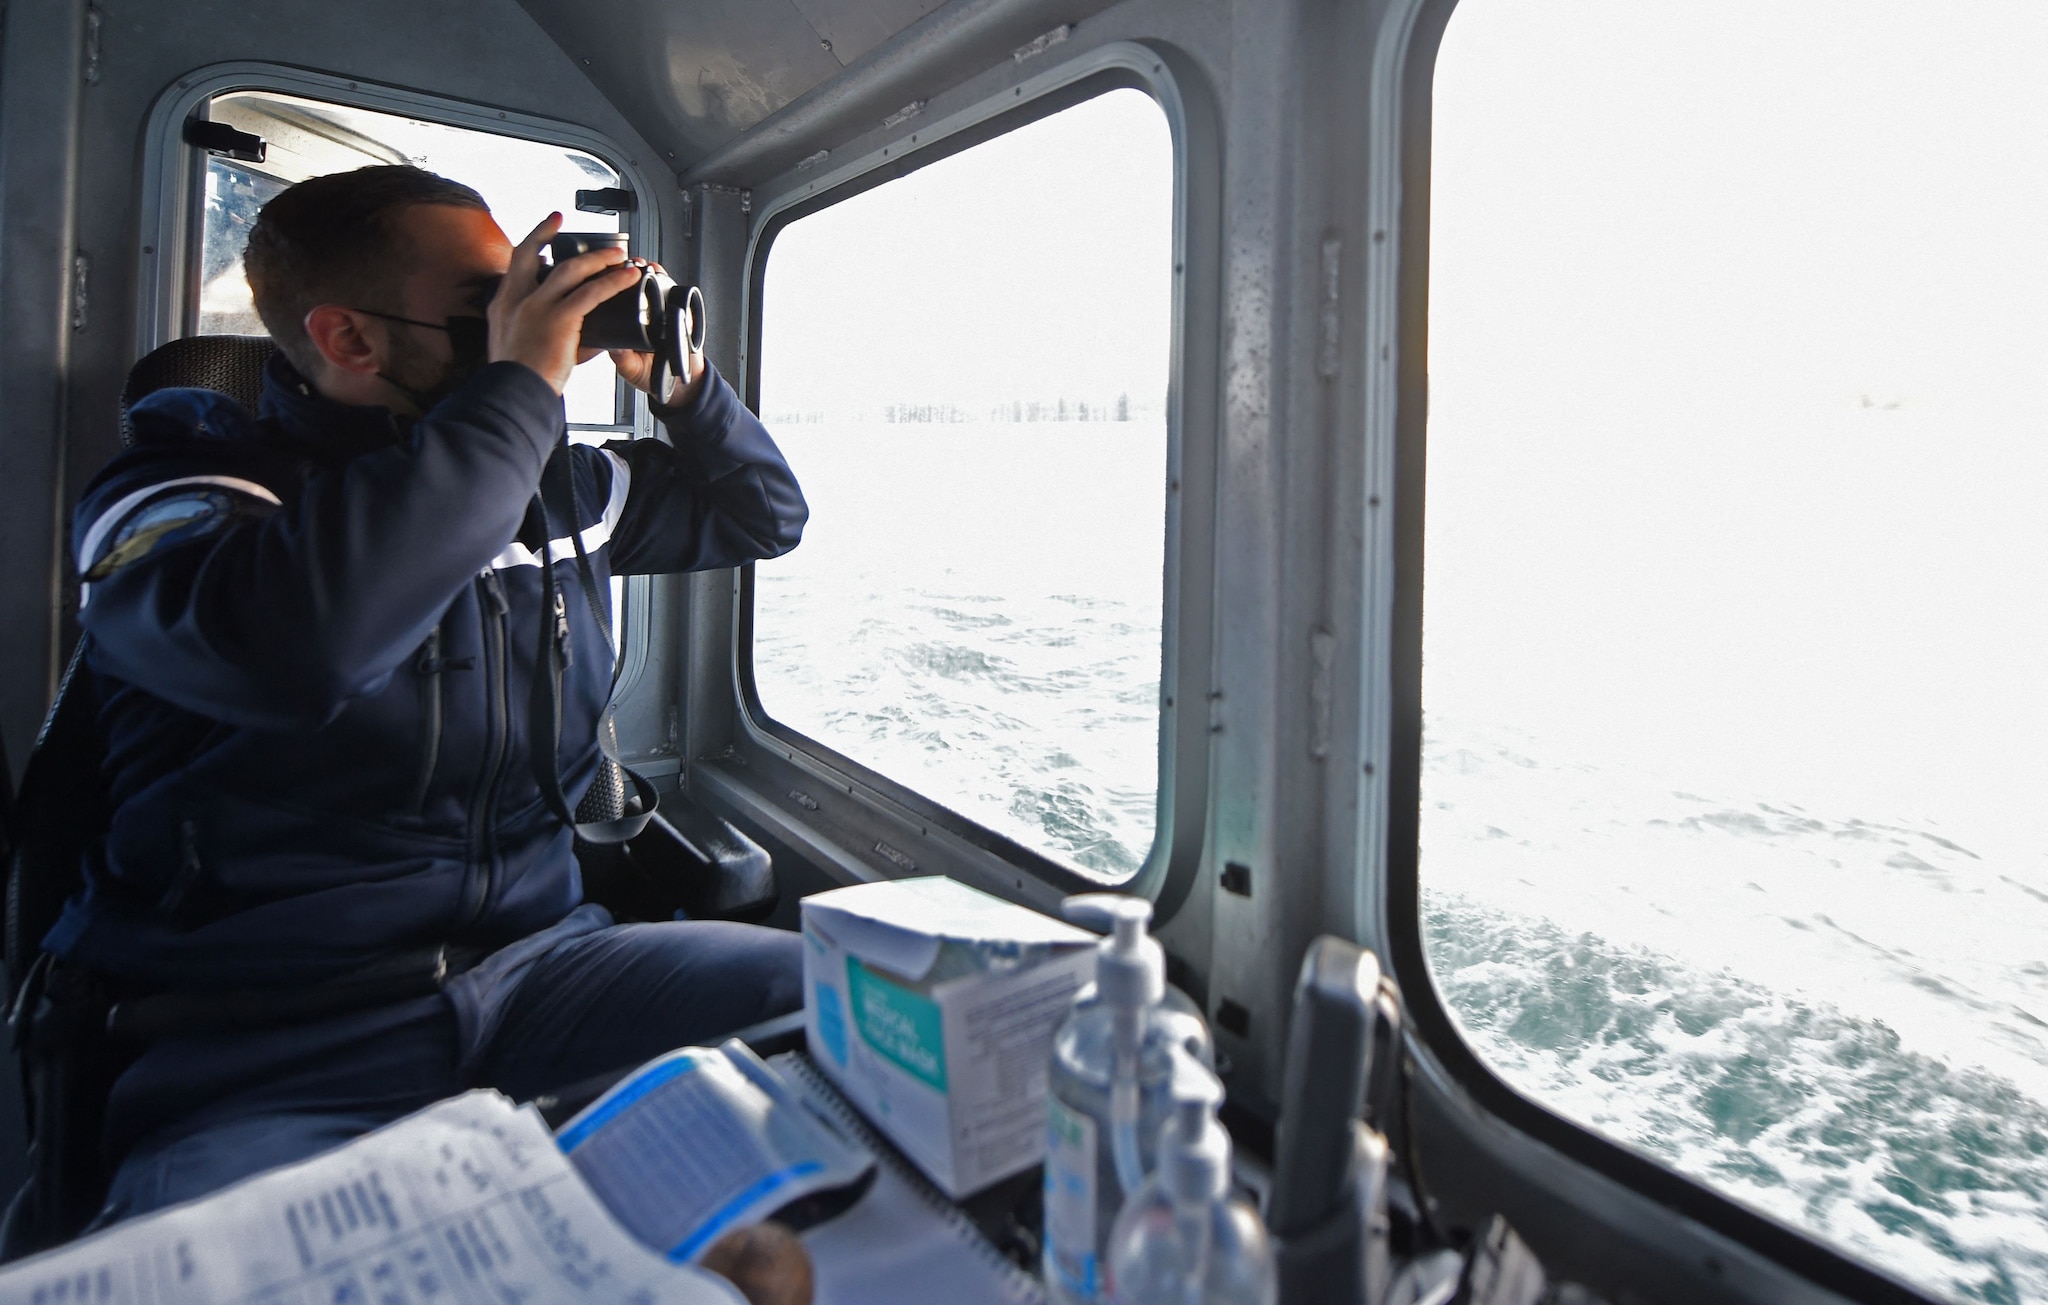 A French Maritime Gendarme from Boulogne-Sur-Mer, south of the port of Calais, searching for migrants trying to cross the Channel.